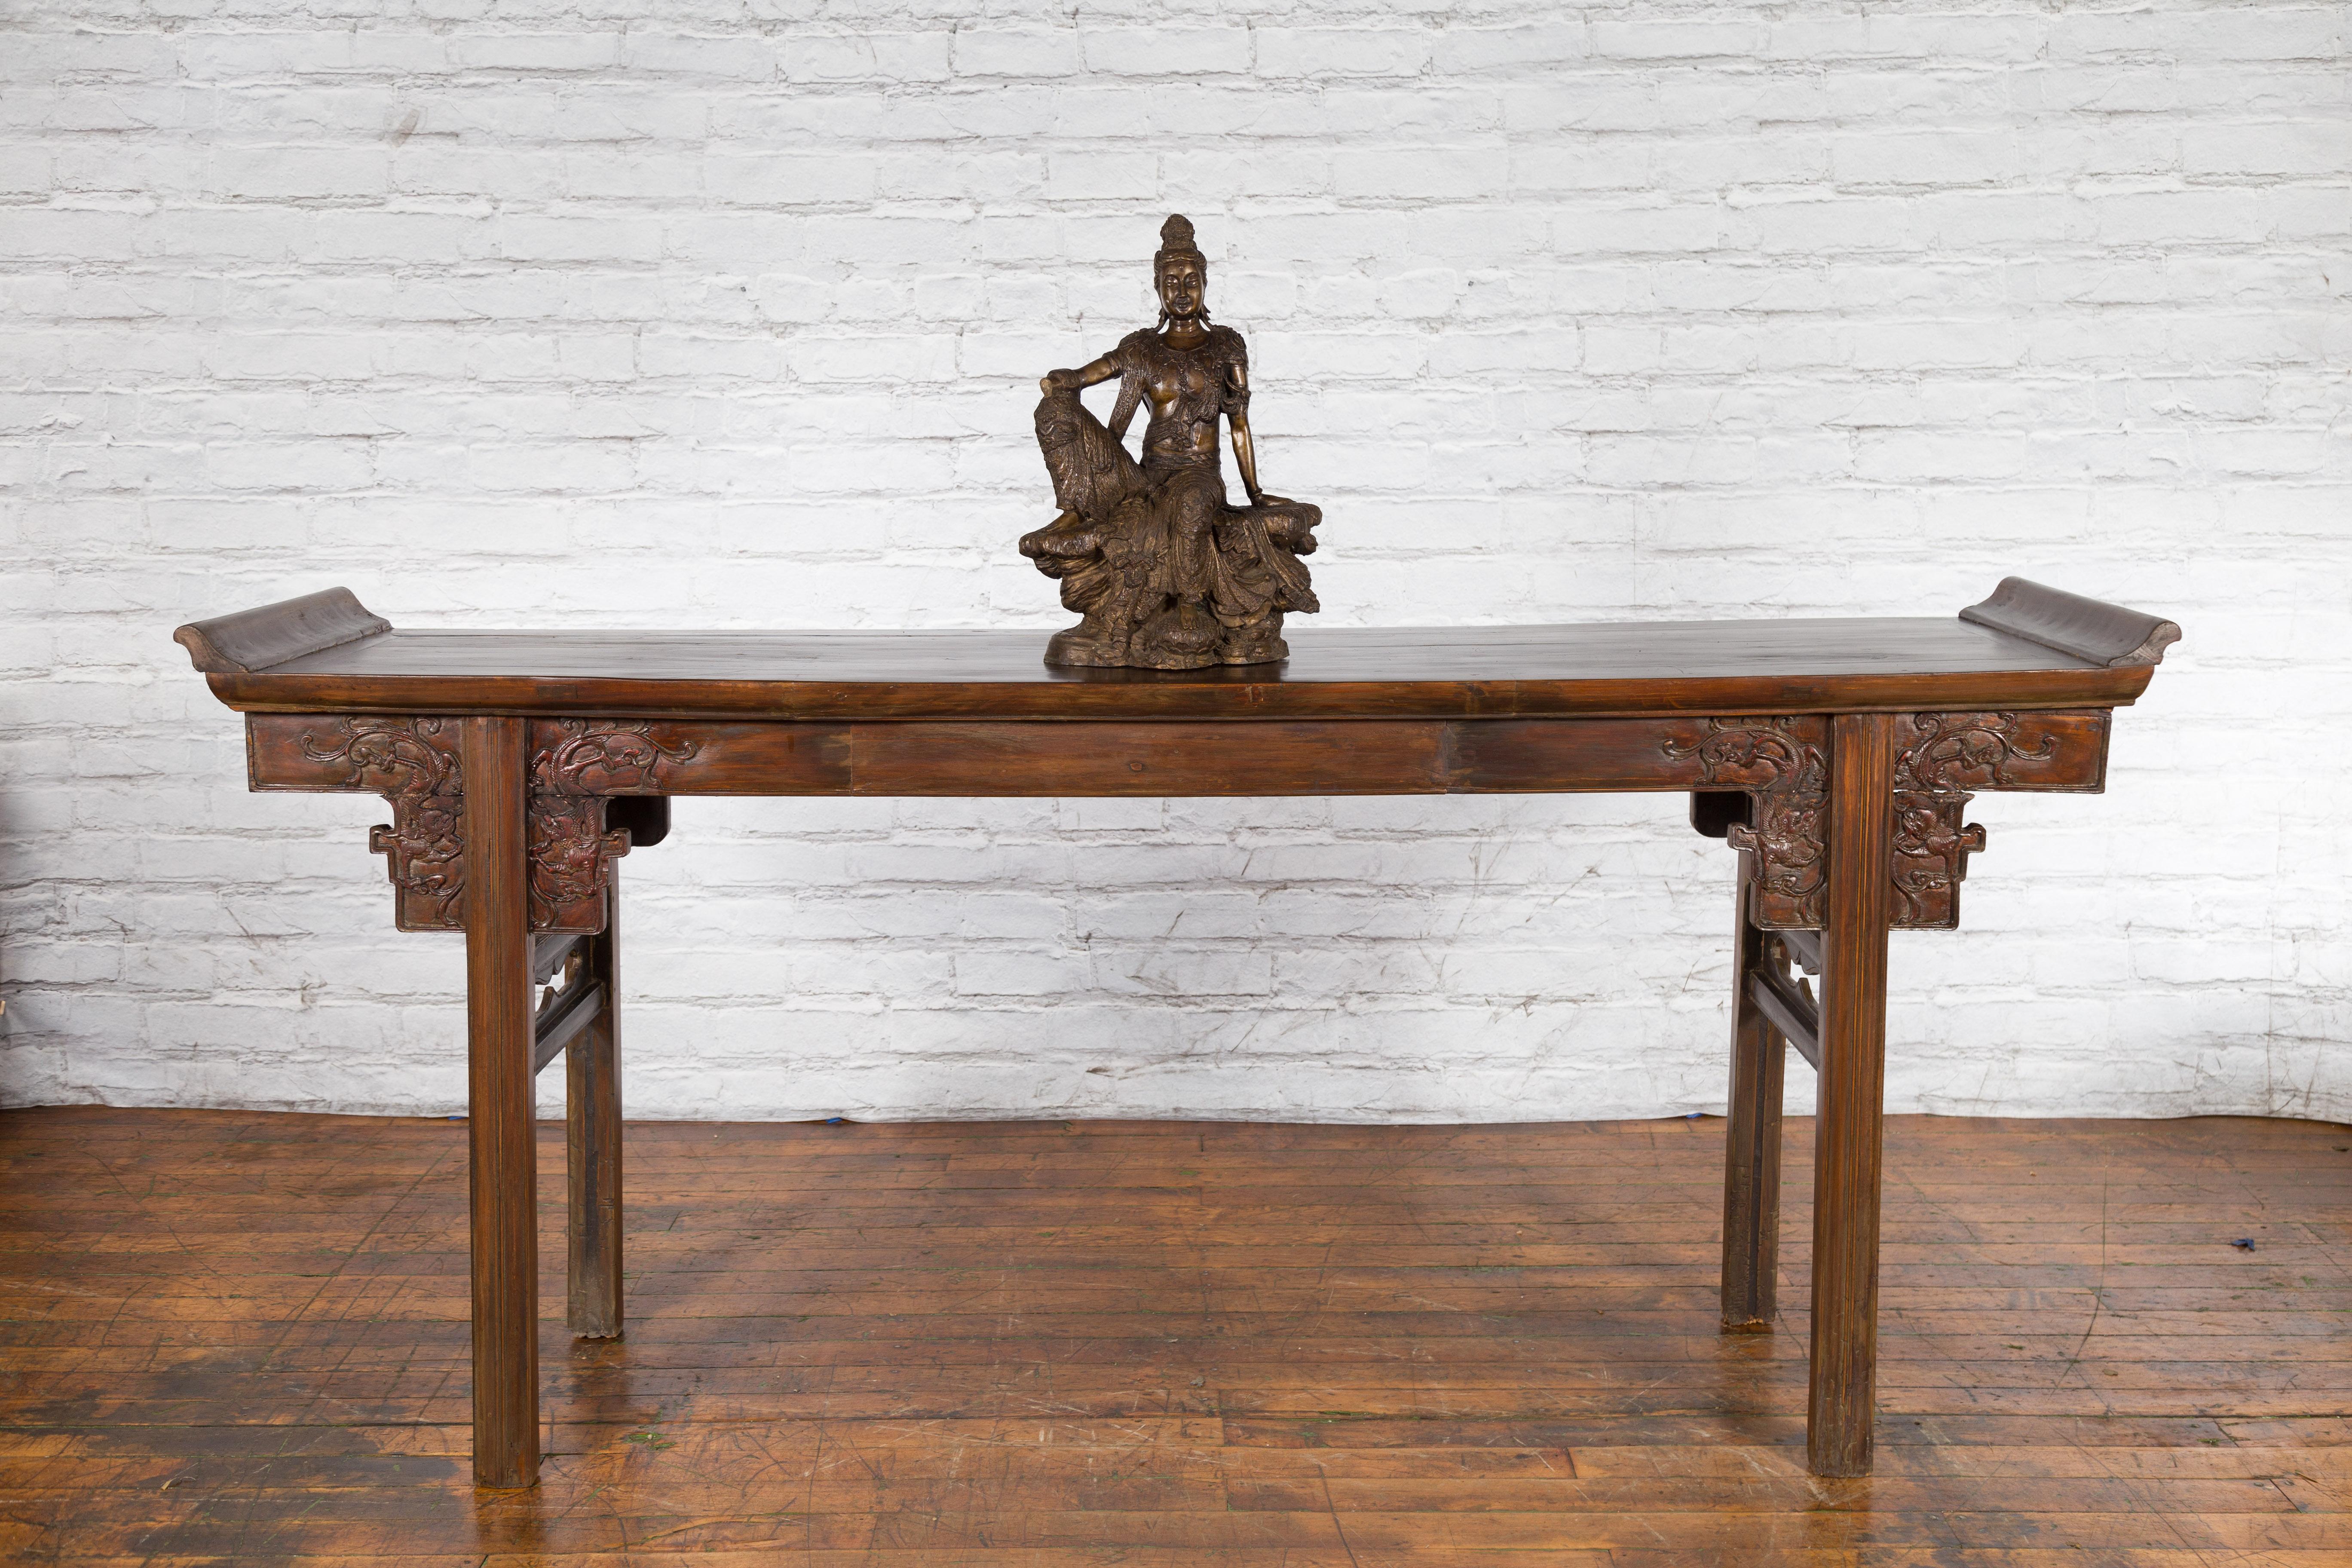 Asian Vintage Bronze Statuette Depicting Quan Yin Seated on a Rocky Formation For Sale